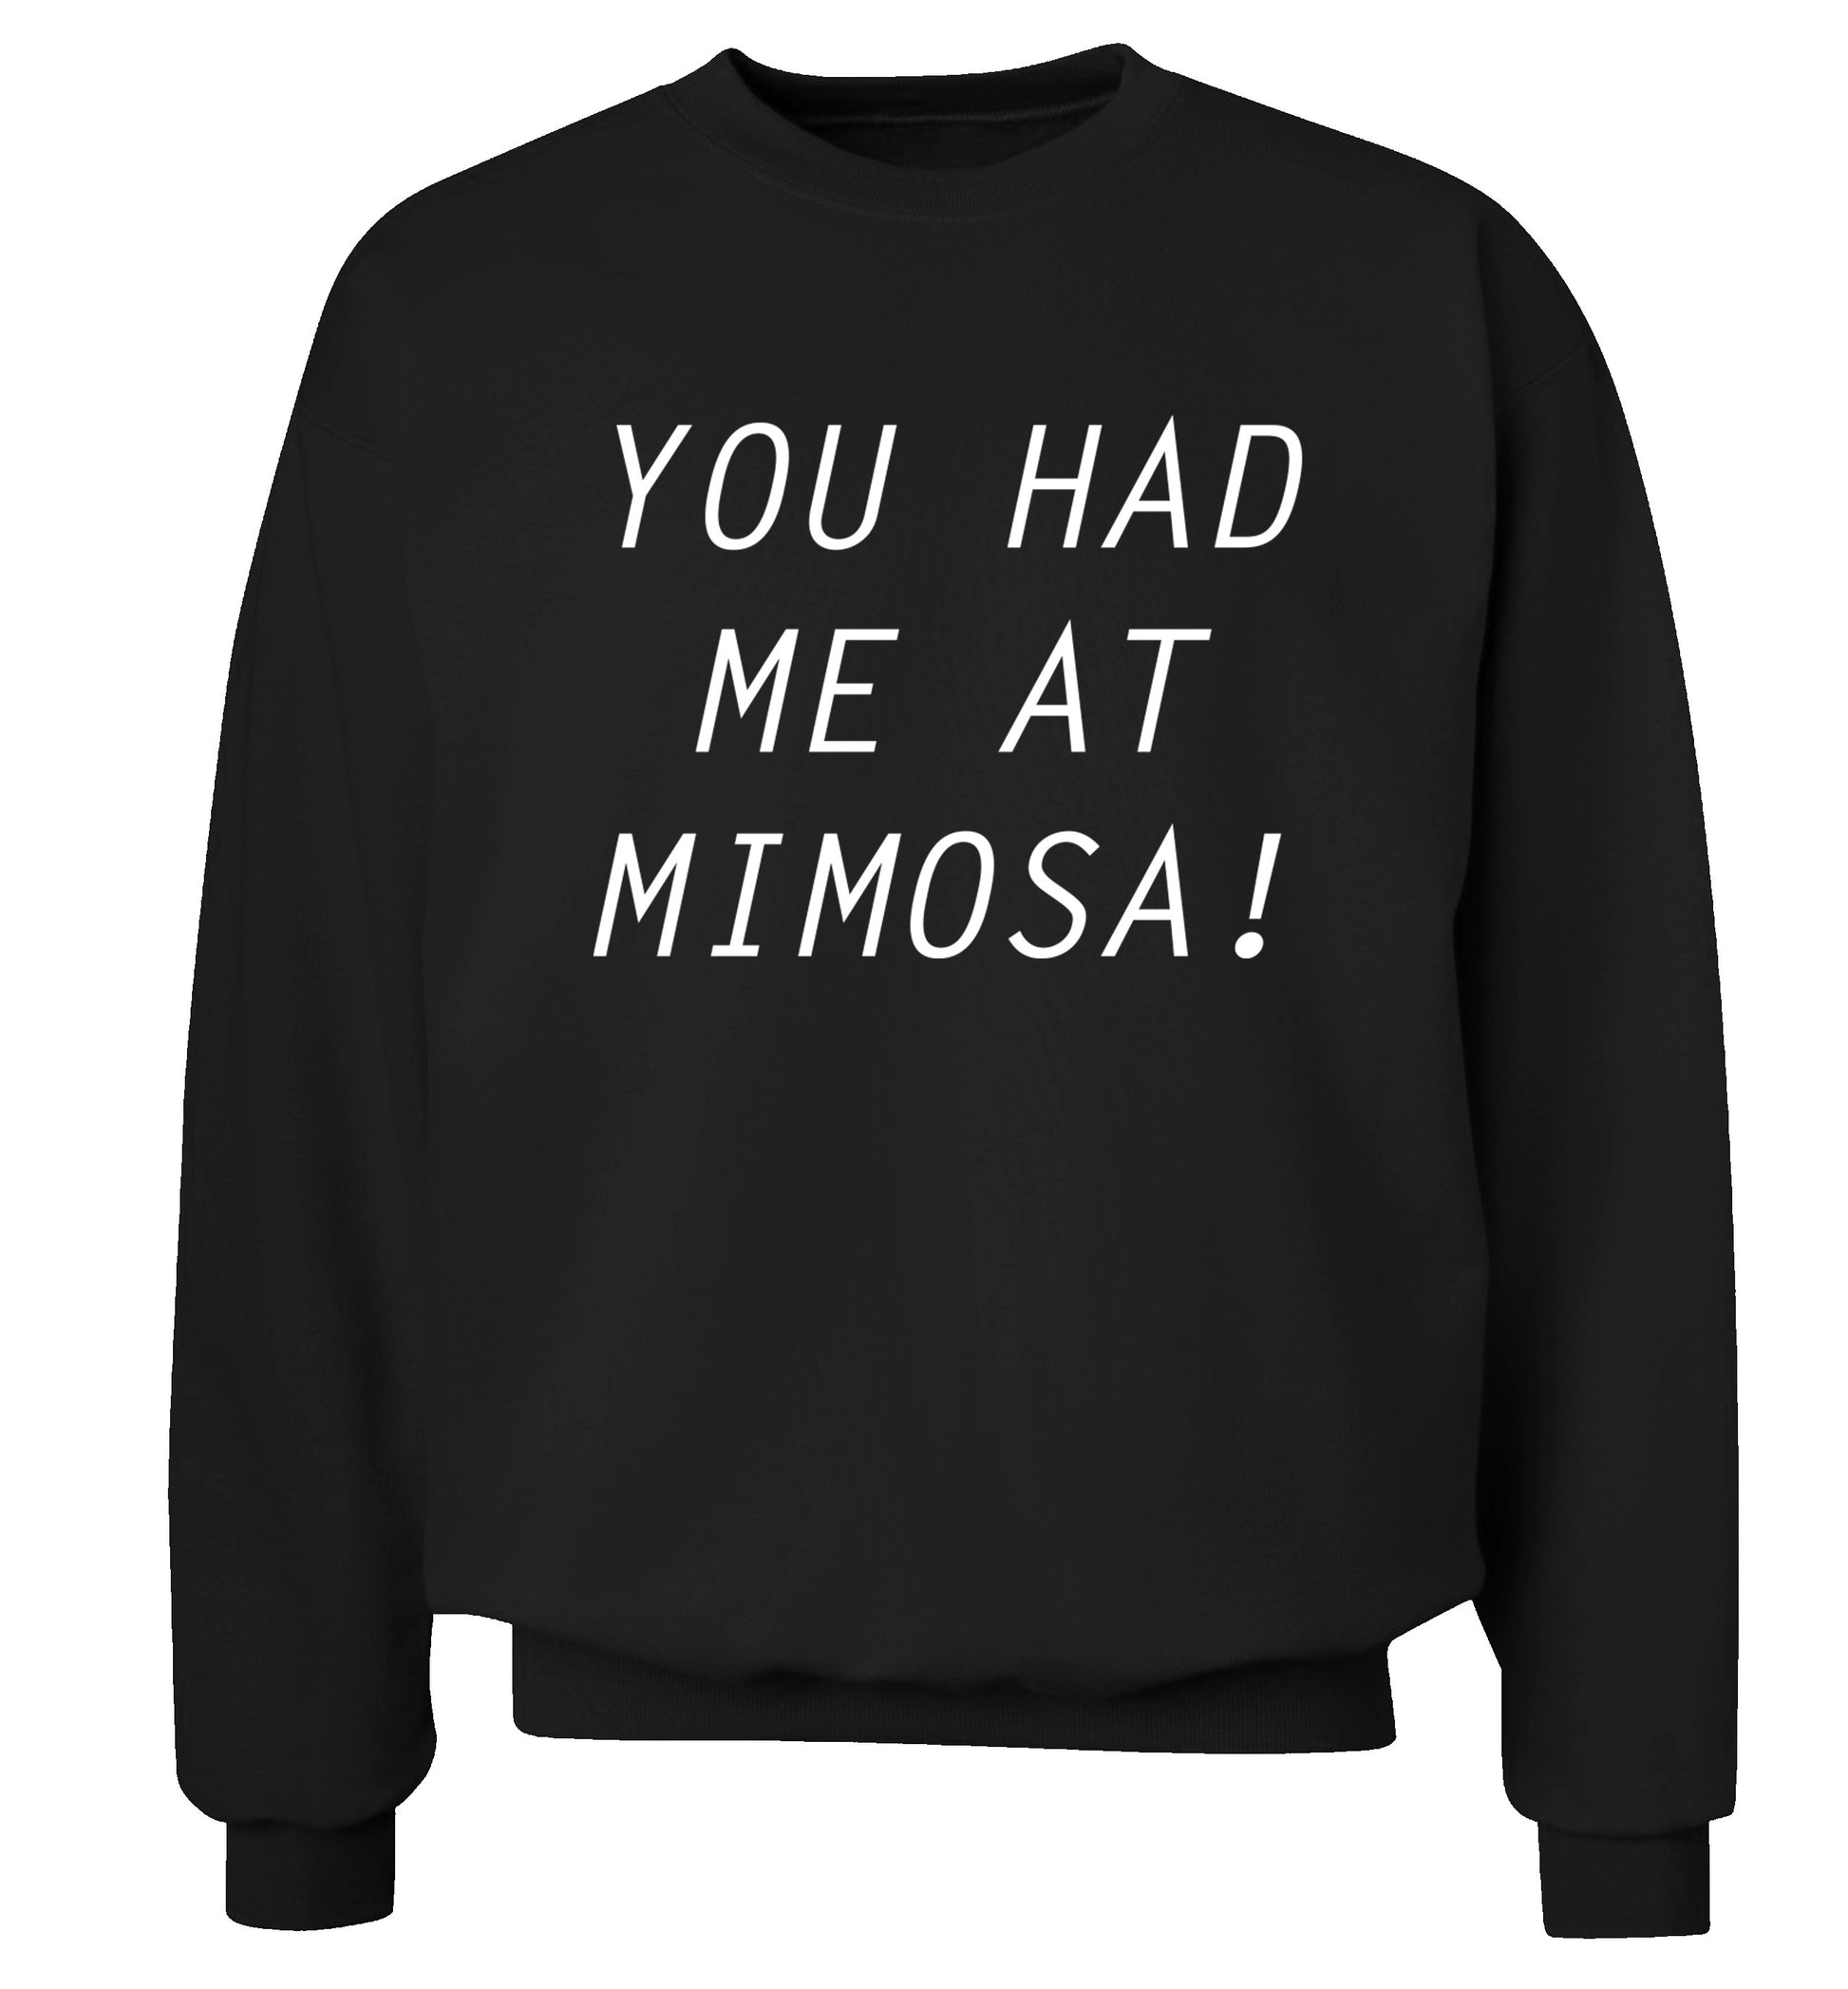 You had me at mimosa Adult's unisex black Sweater 2XL